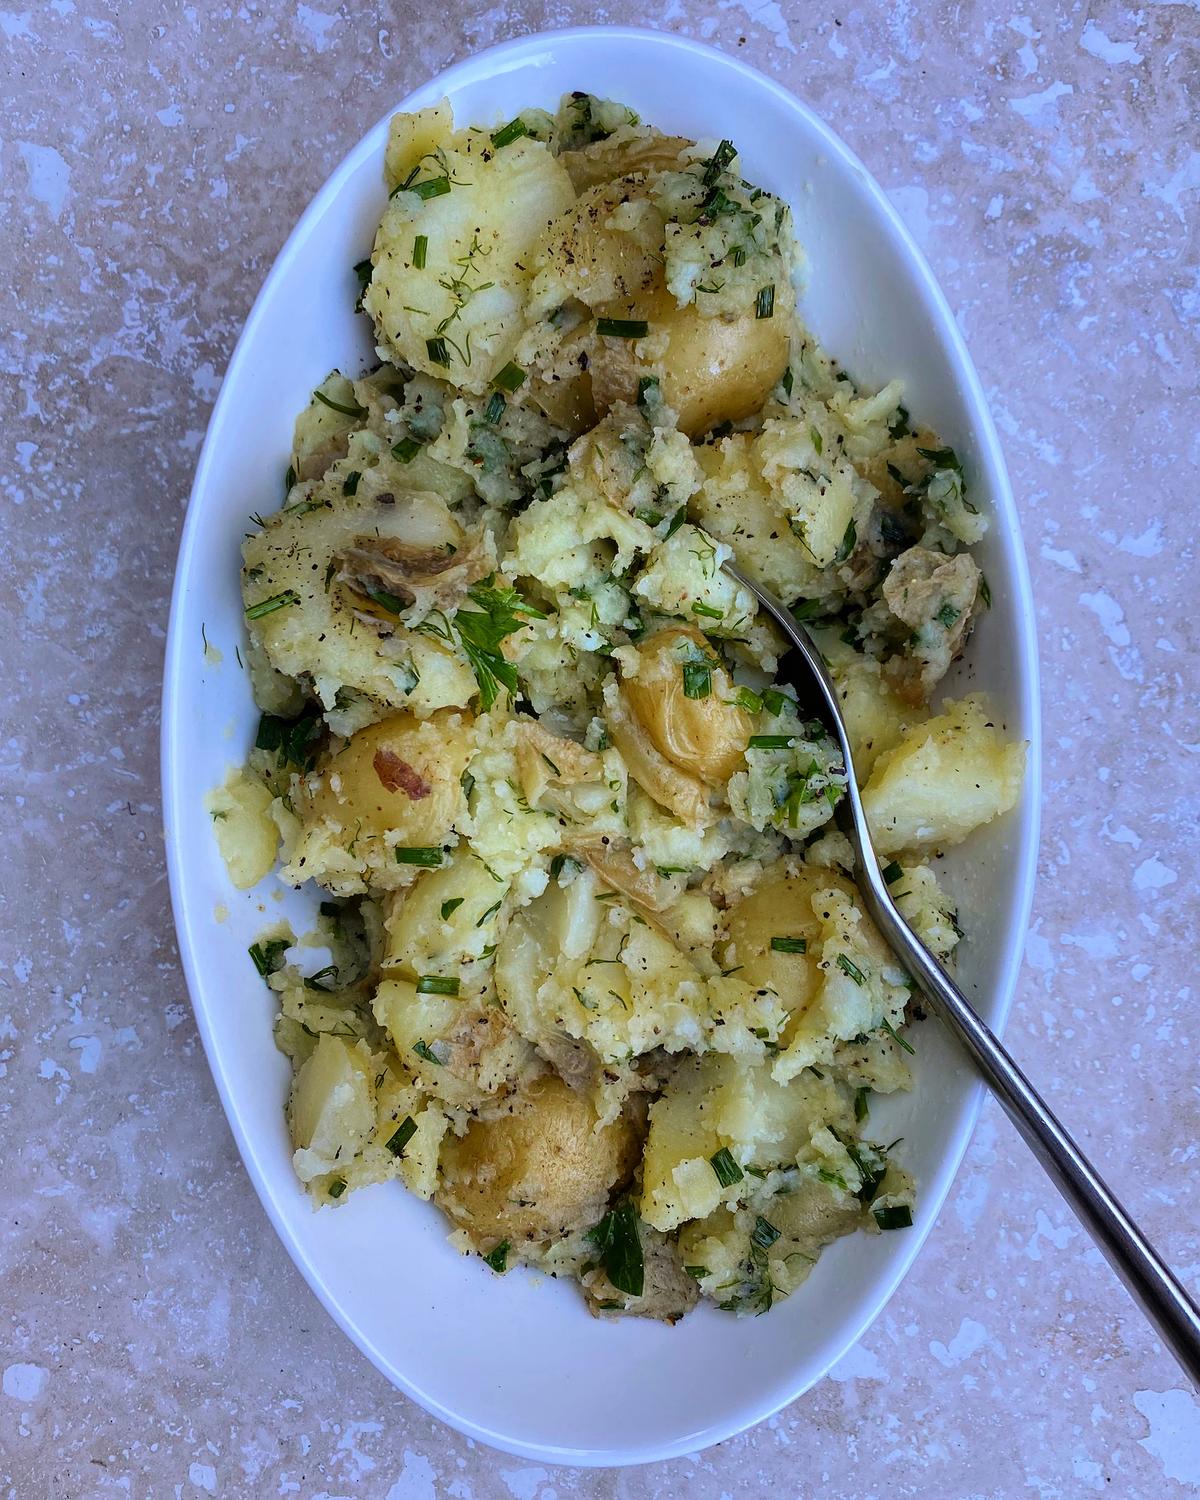 This European-style potato salad is light and bright, laced with vinegar and oil and tumbled with handfuls of fresh herbs. (Lynda Balslev for Tastefood)